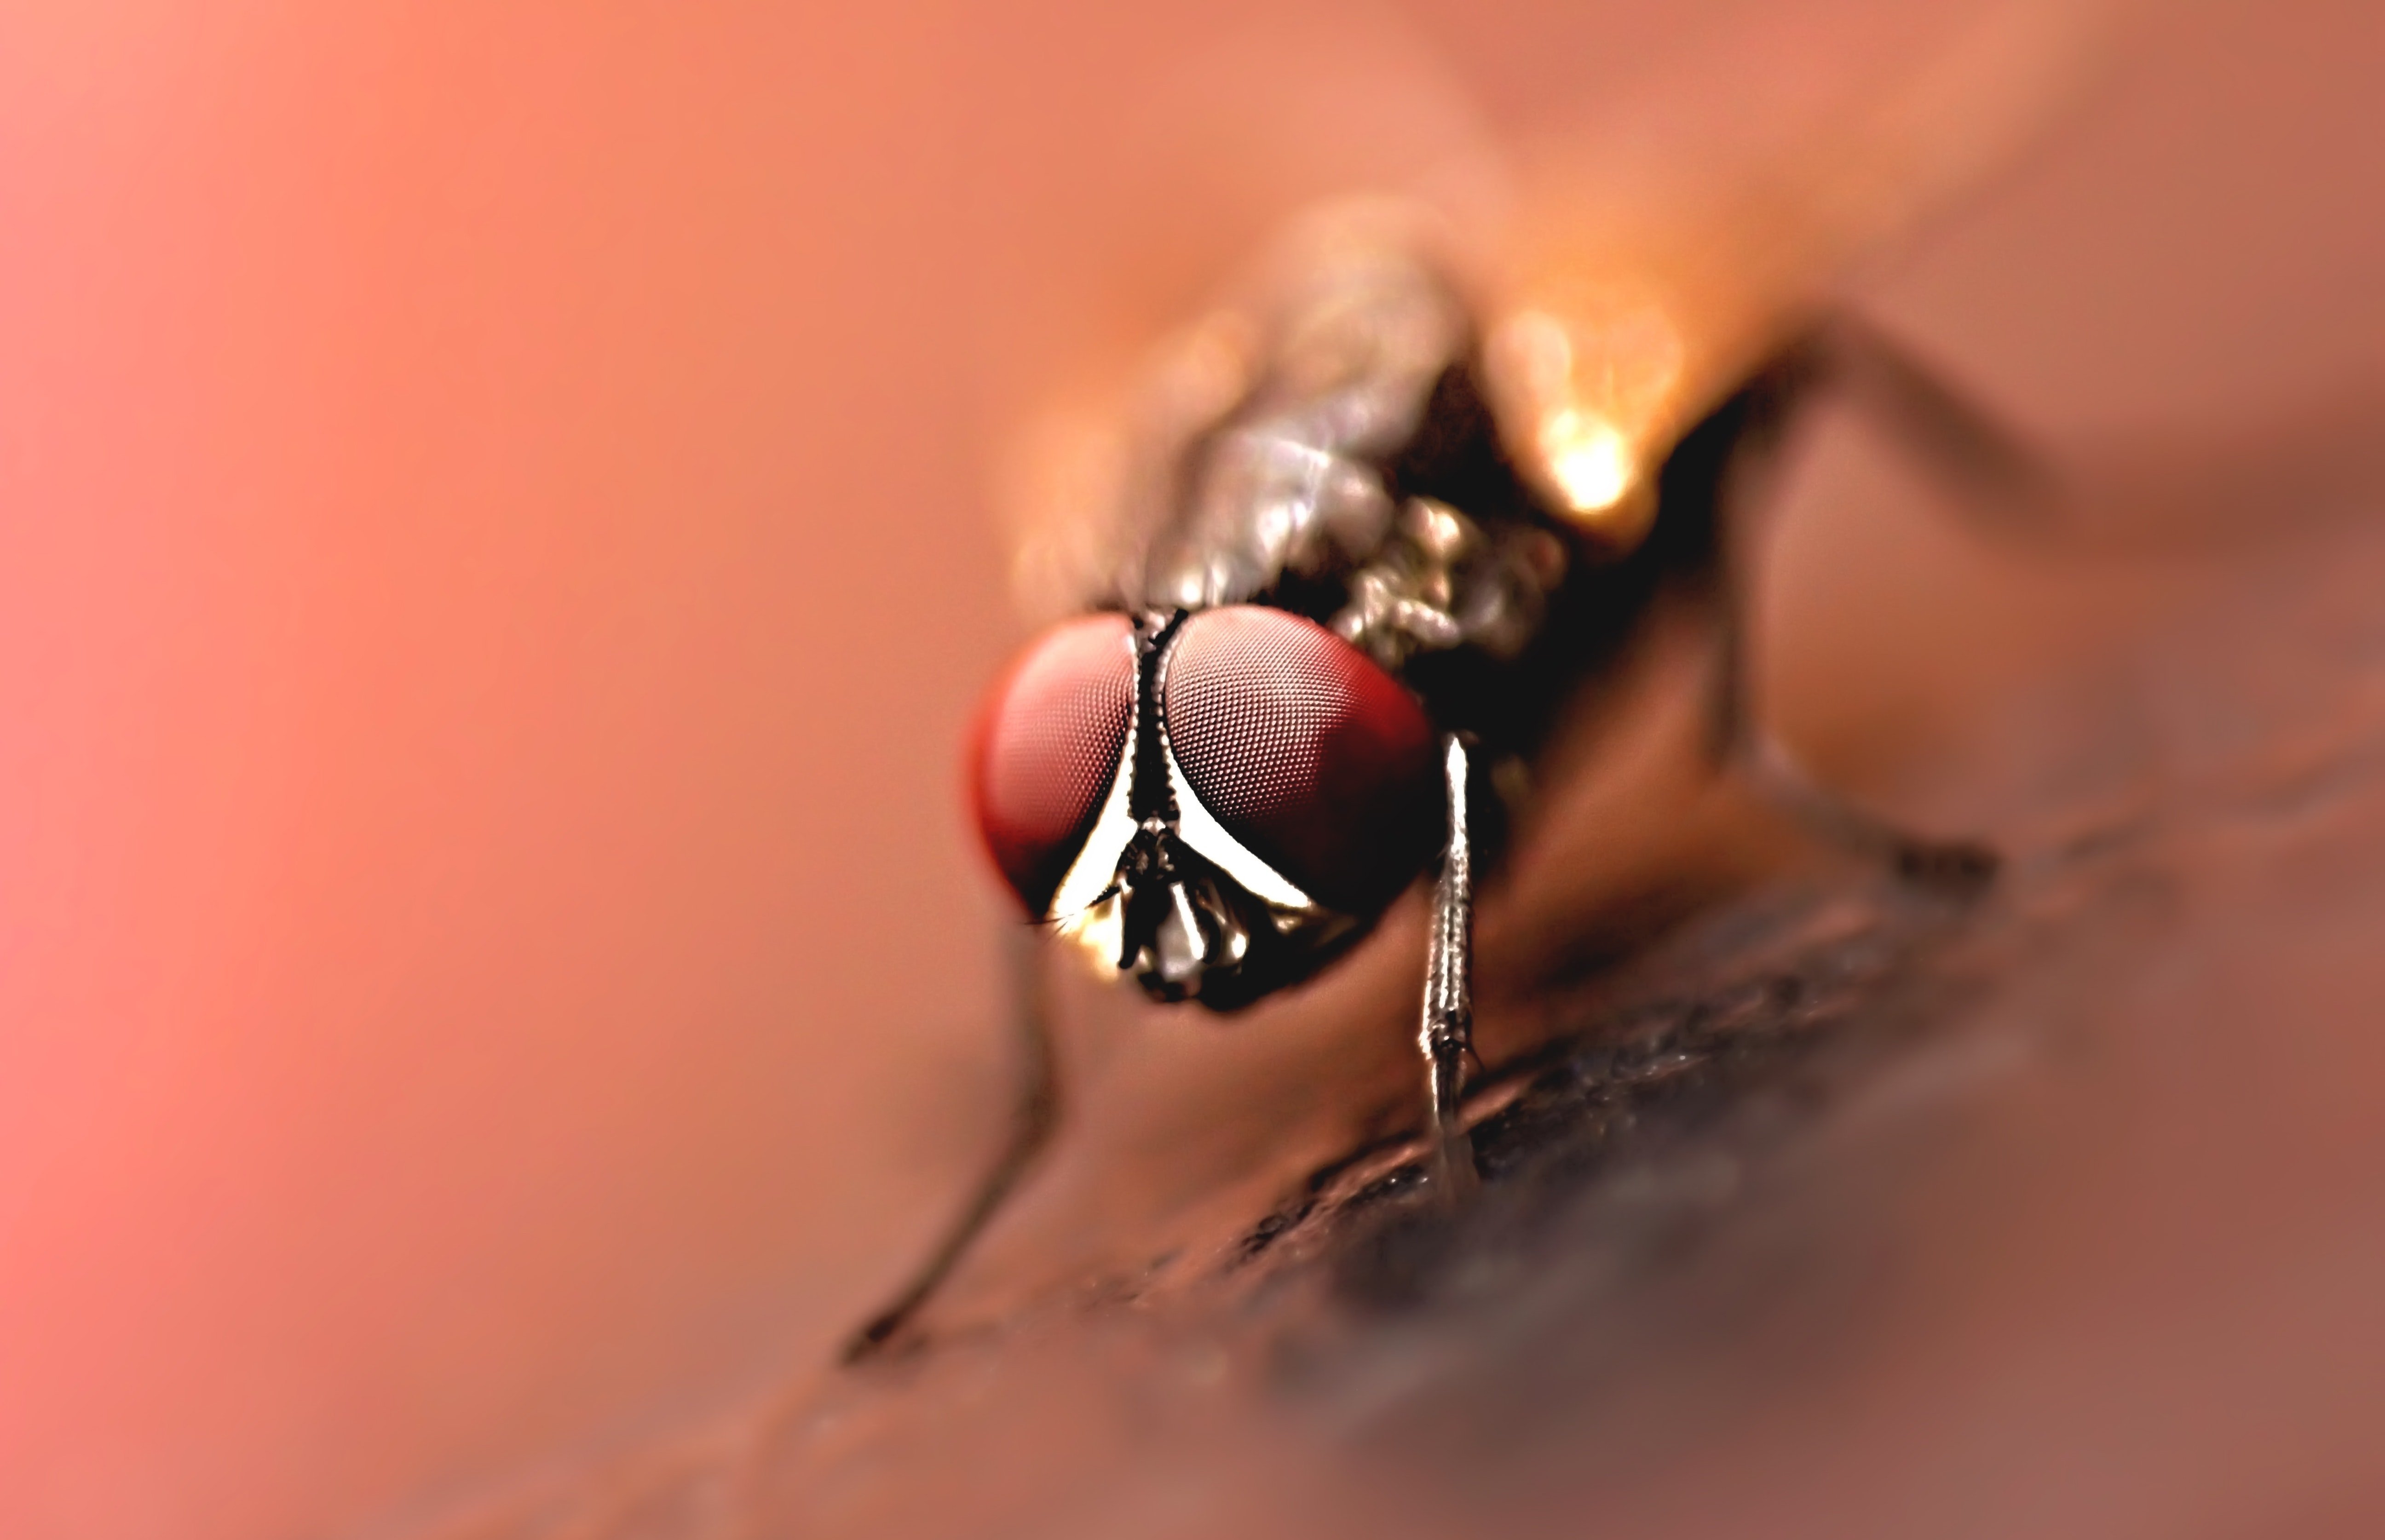 A housefly. | Source: Pexels